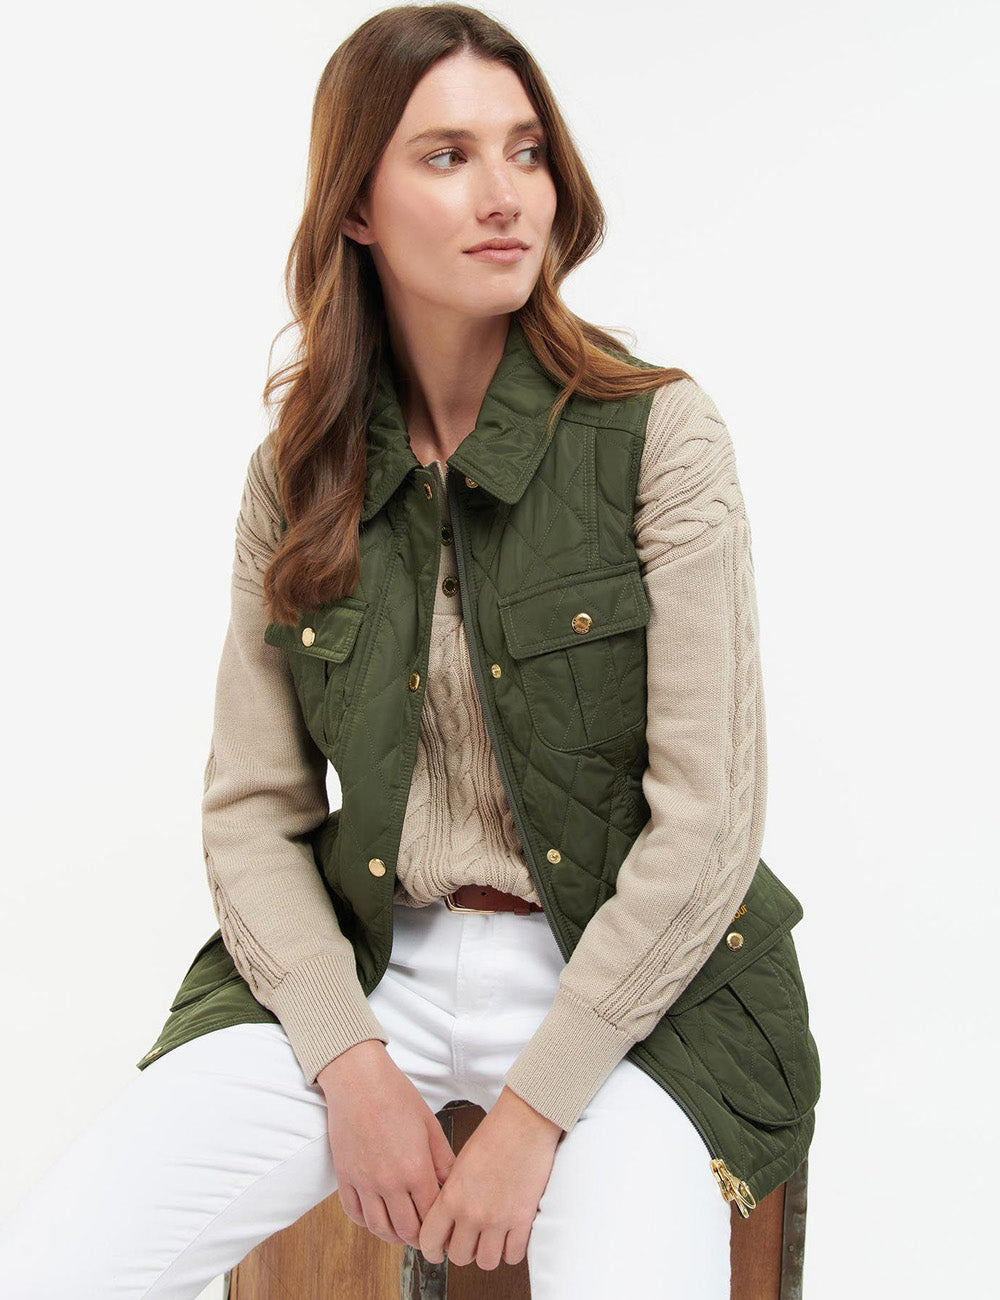 Woman sitting down wearing the Barbour Belted Defence Gilet